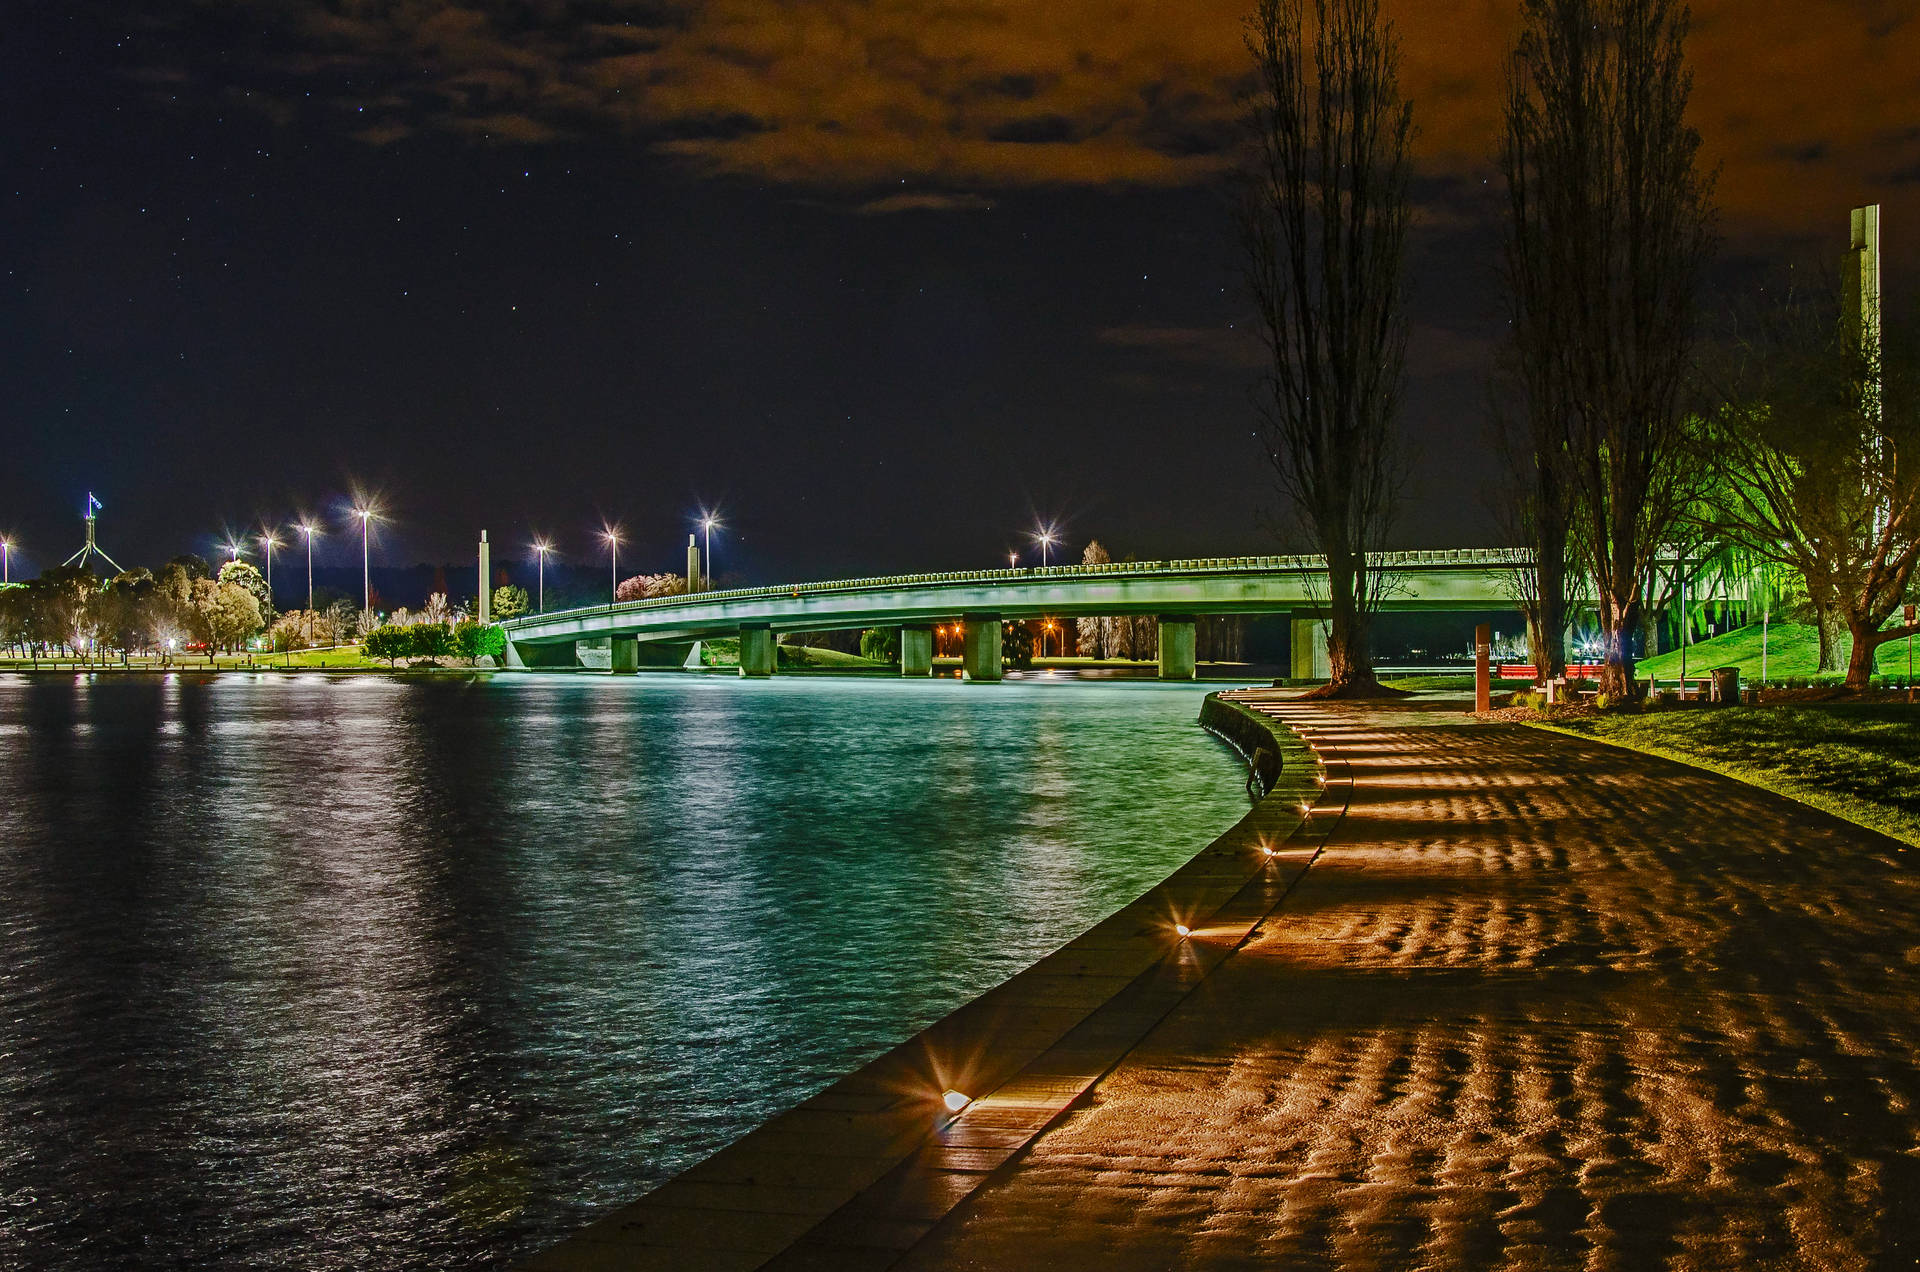 Canberracommonwealth Bridge Green Light Is Translated To 